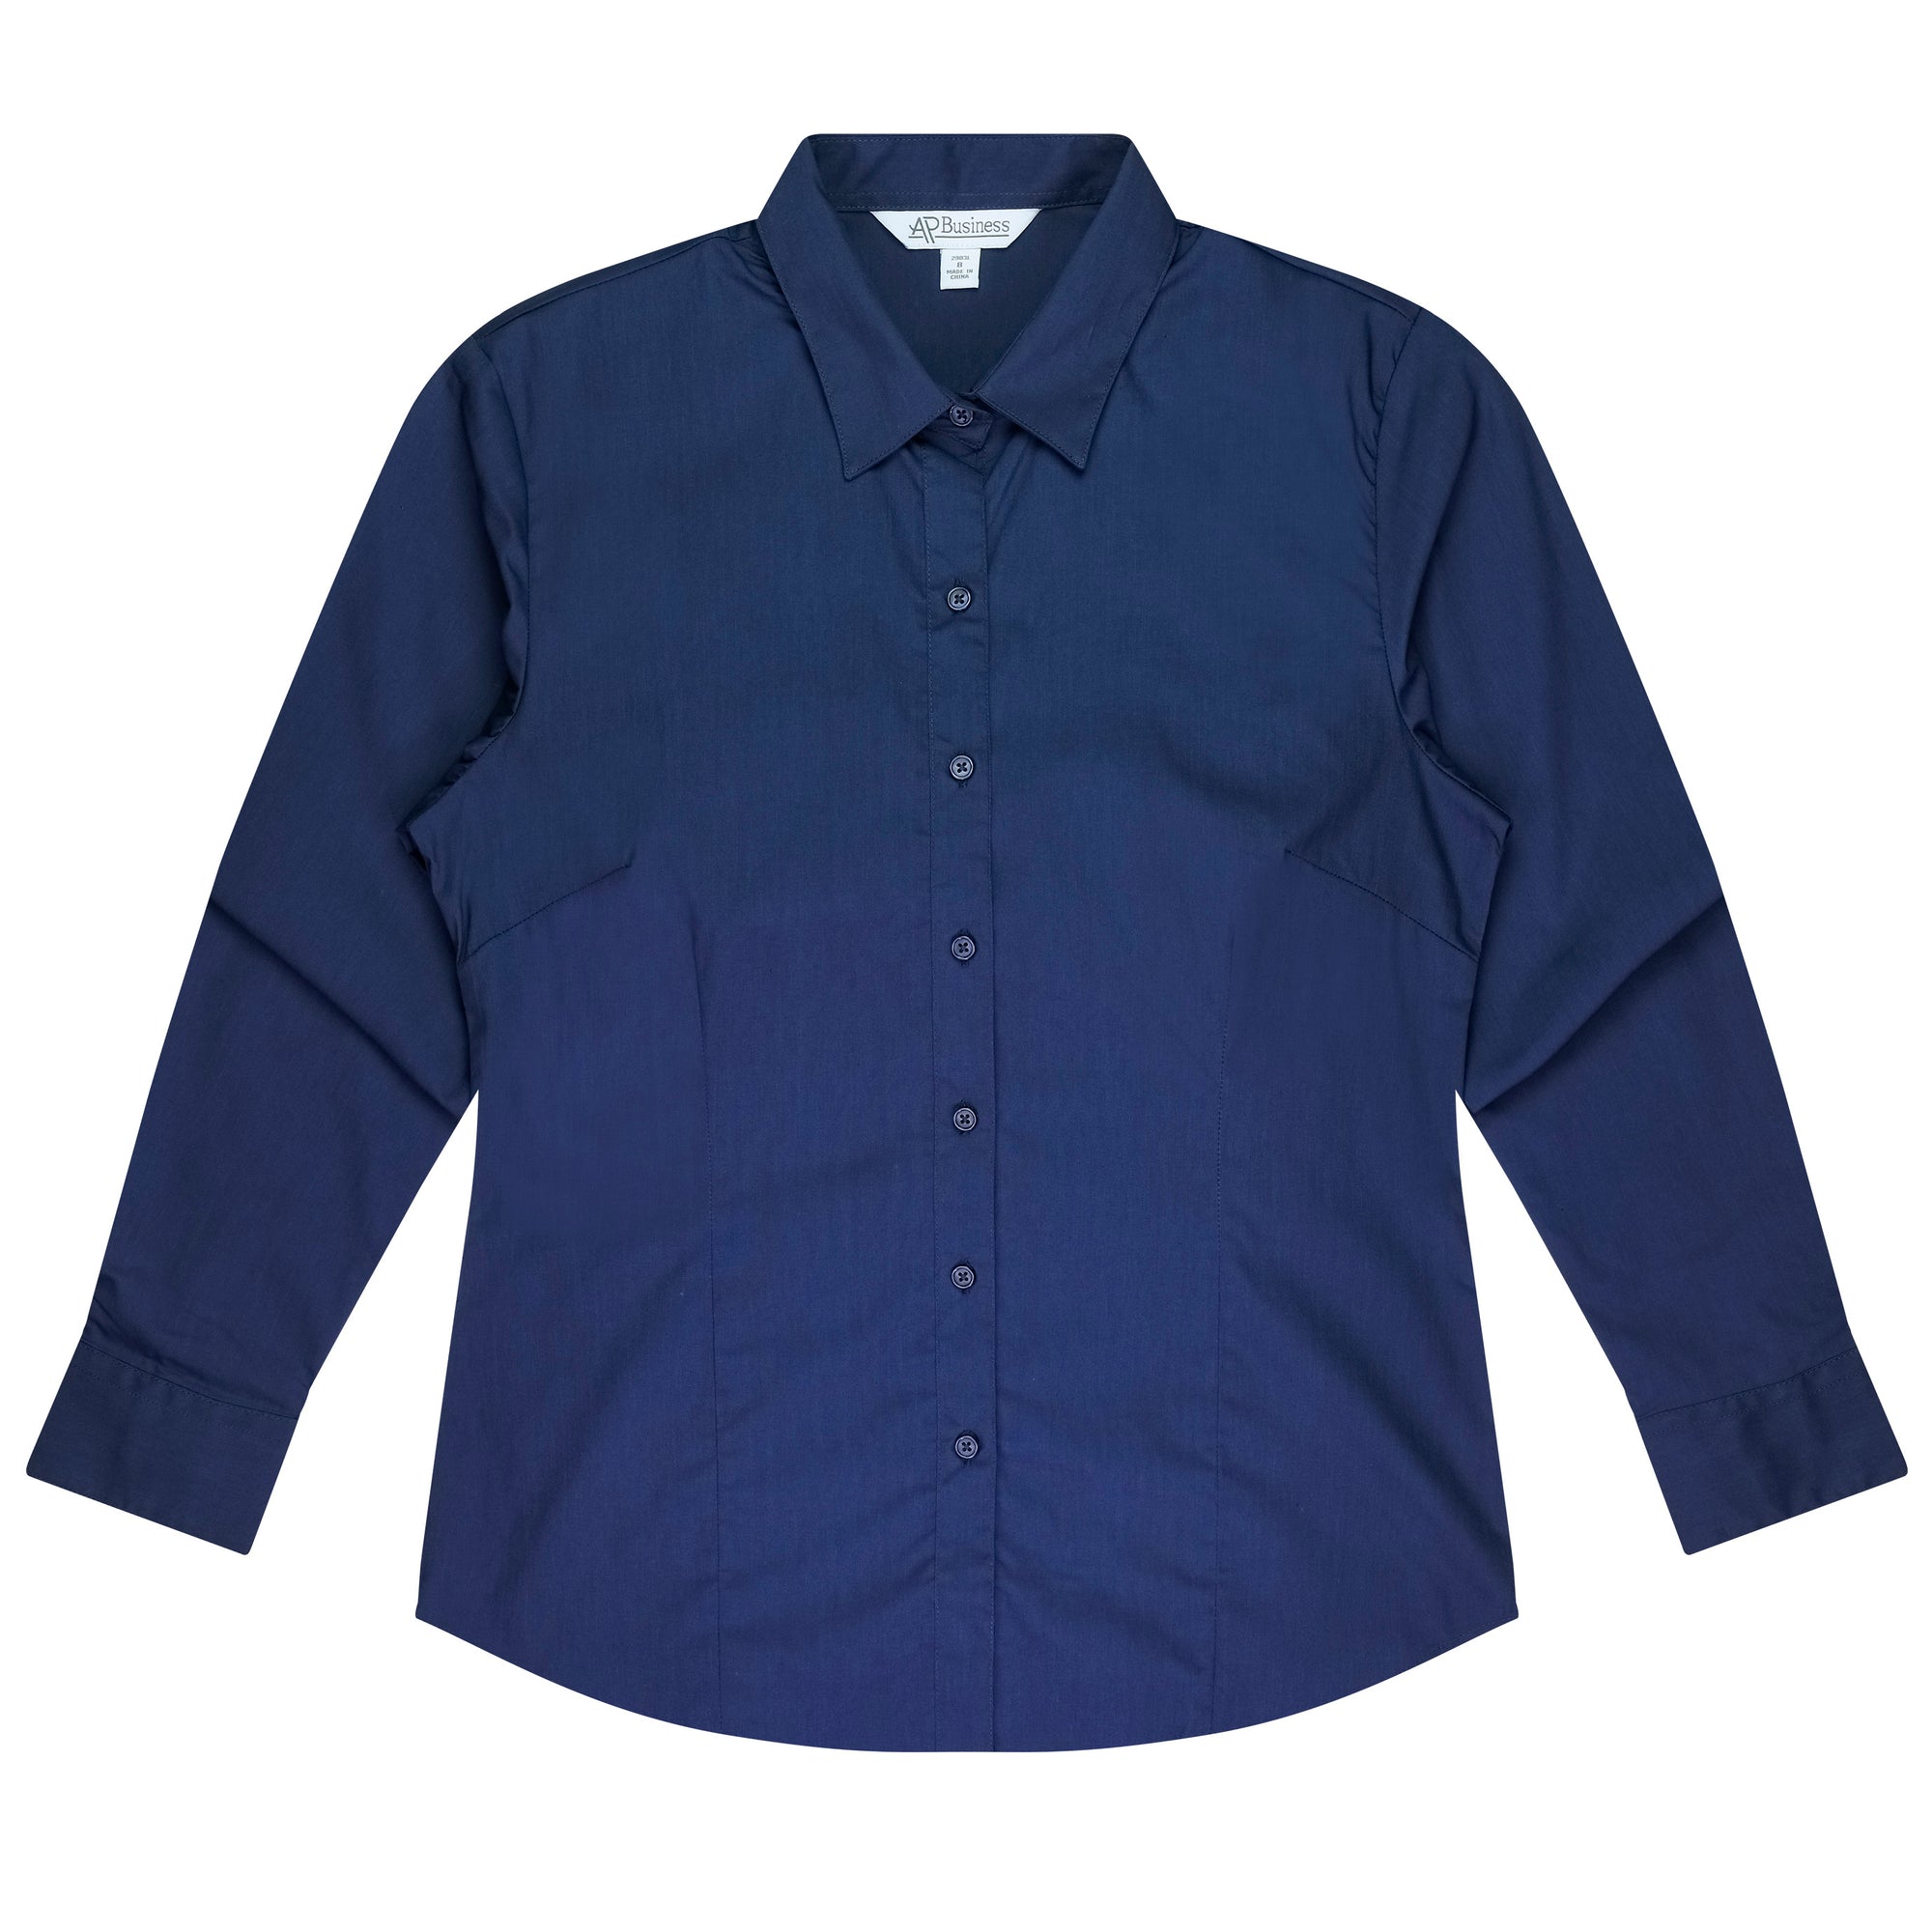 Mosman Embroidered Ladies Long Sleeve Business Shirt - Navy